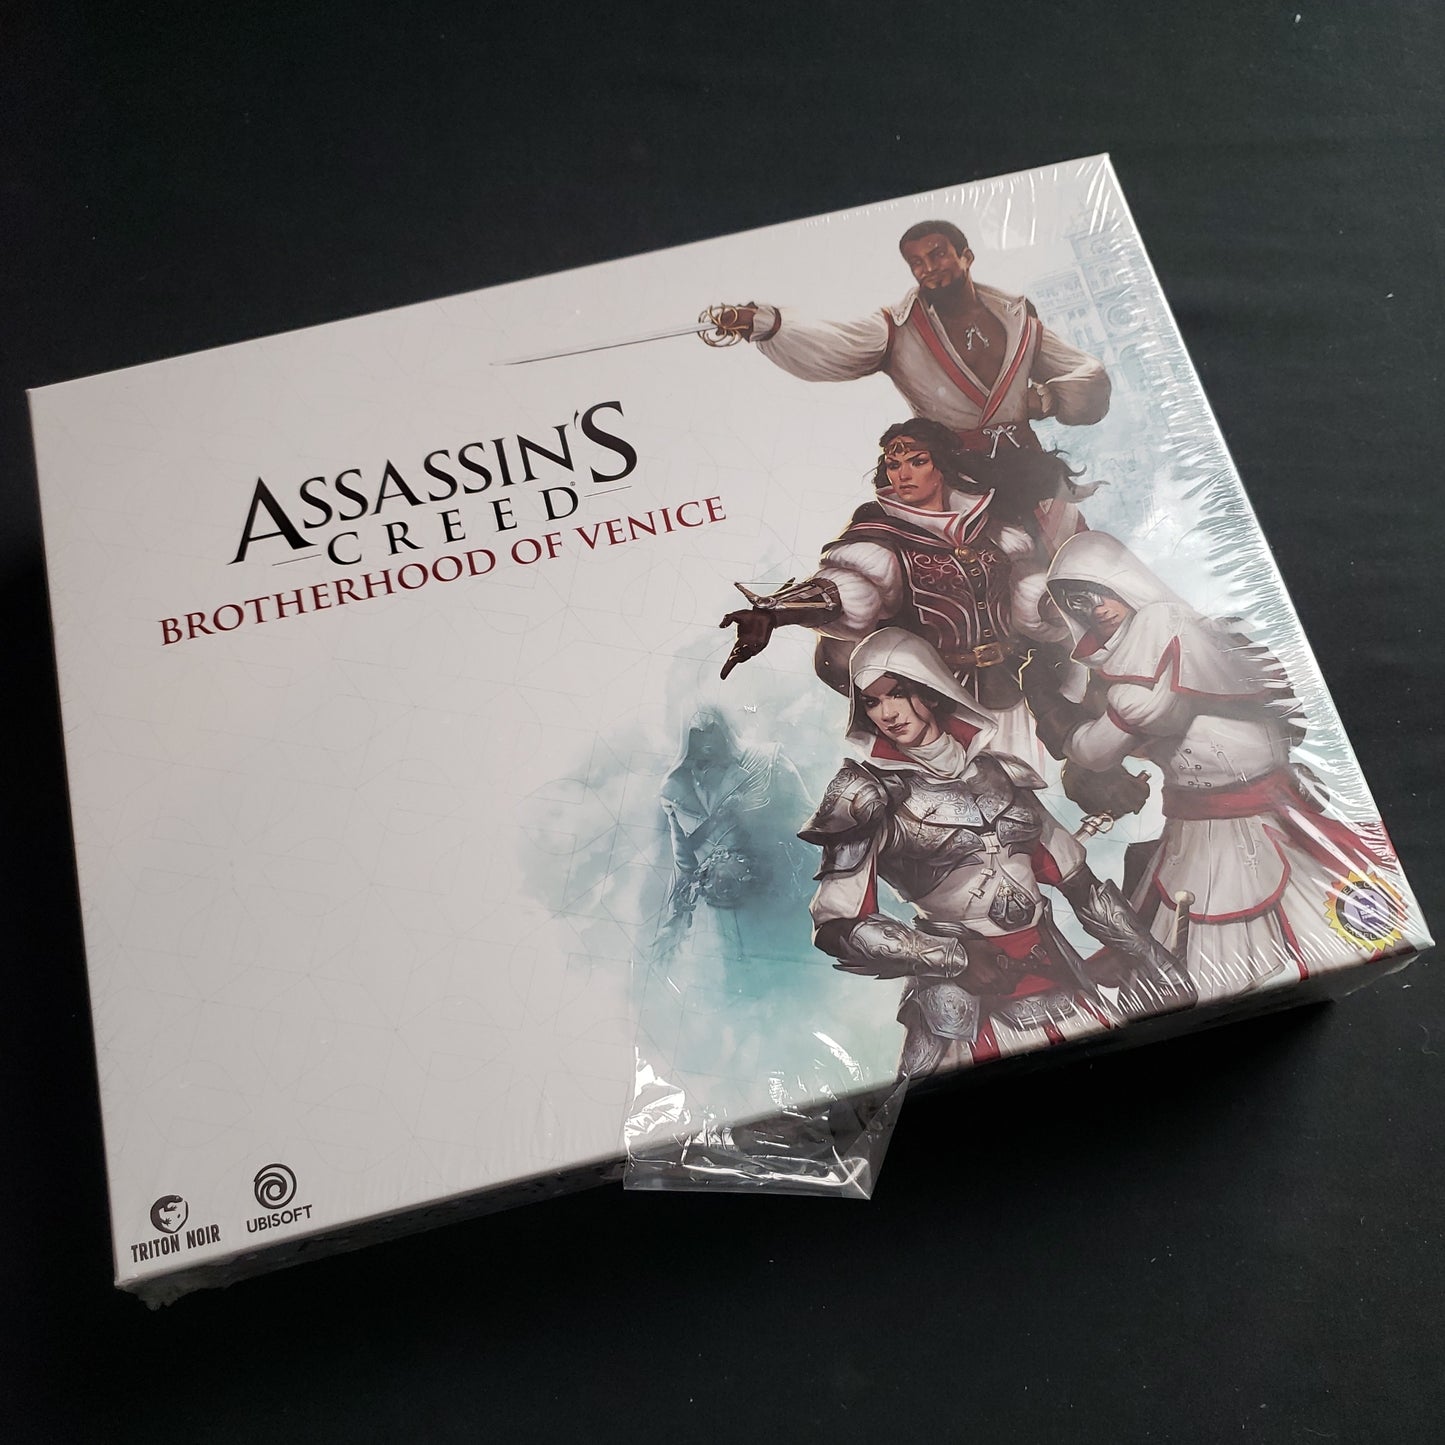 Image shows the front cover of the box of the Assassin's Creed: Brotherhood of Venice board game